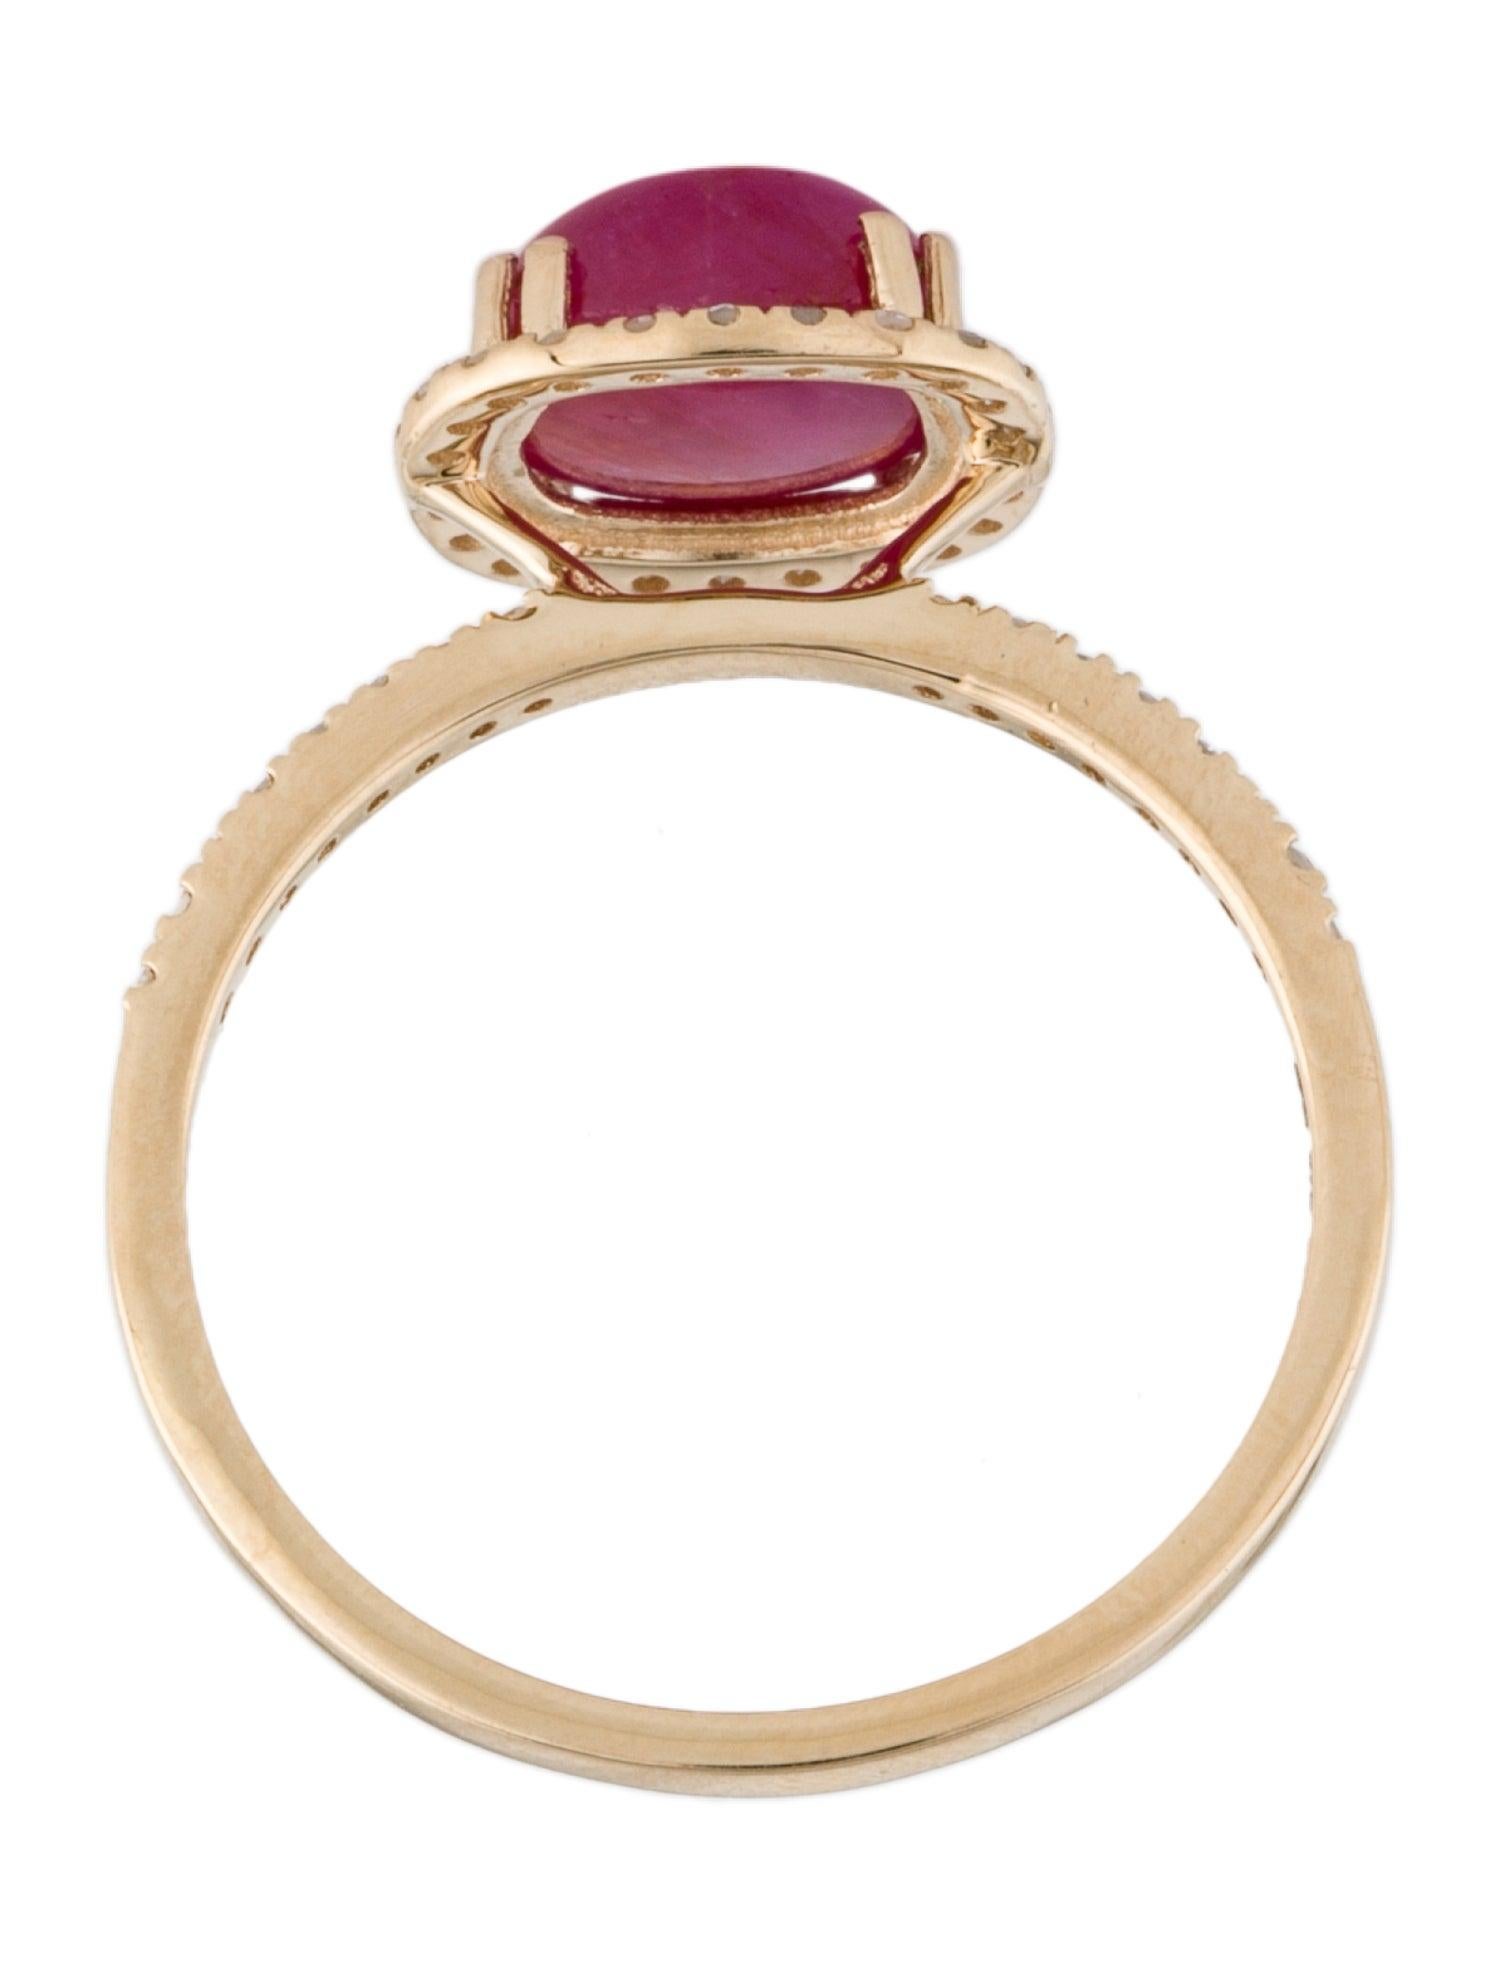 Elegant 14K Ruby & Diamond Cocktail Ring - Size 8 - Luxurious Gemstone Jewelry In New Condition For Sale In Holtsville, NY